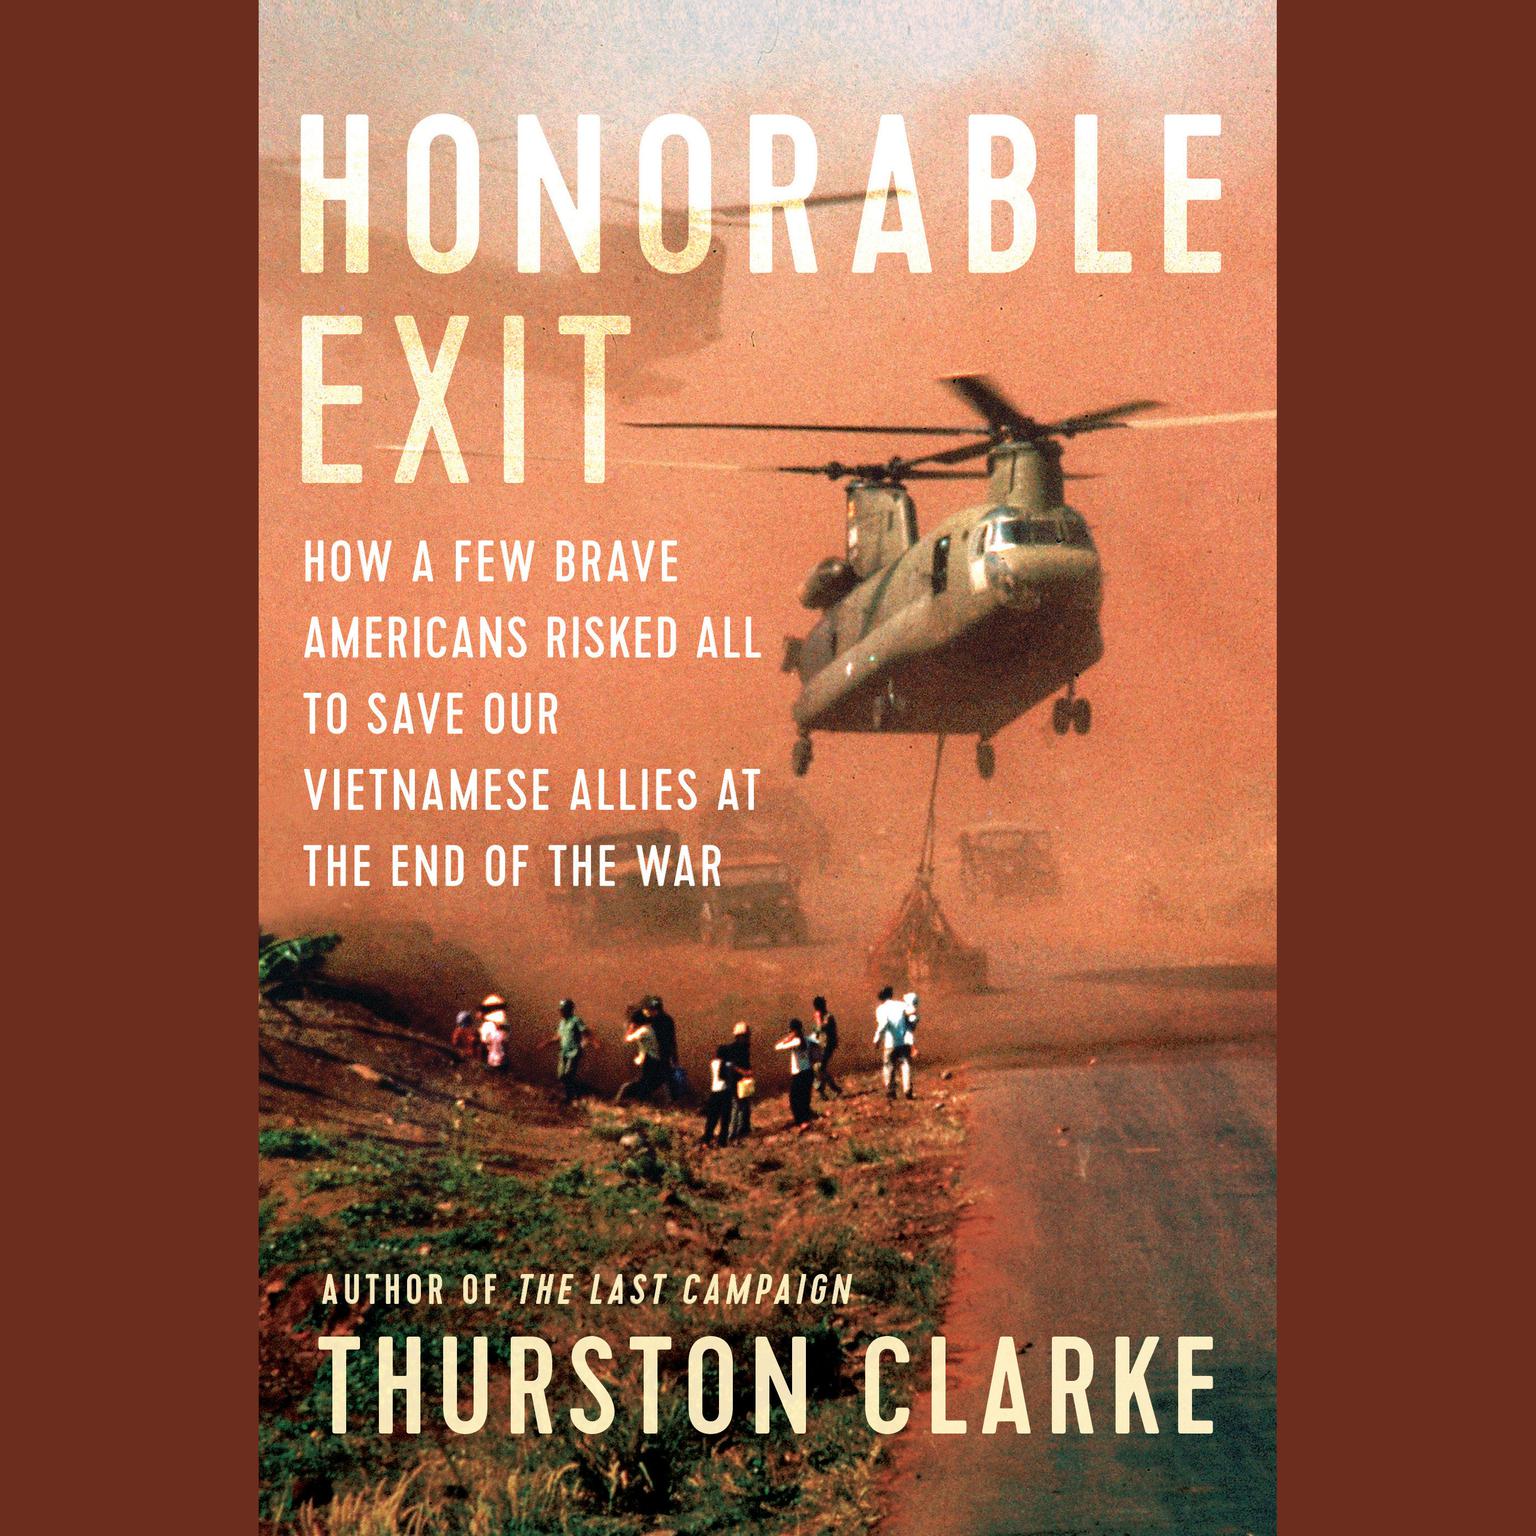 Honorable Exit: How a Few Brave Americans Risked All to Save Our Vietnamese Allies at the End of the War Audiobook, by Thurston Clarke